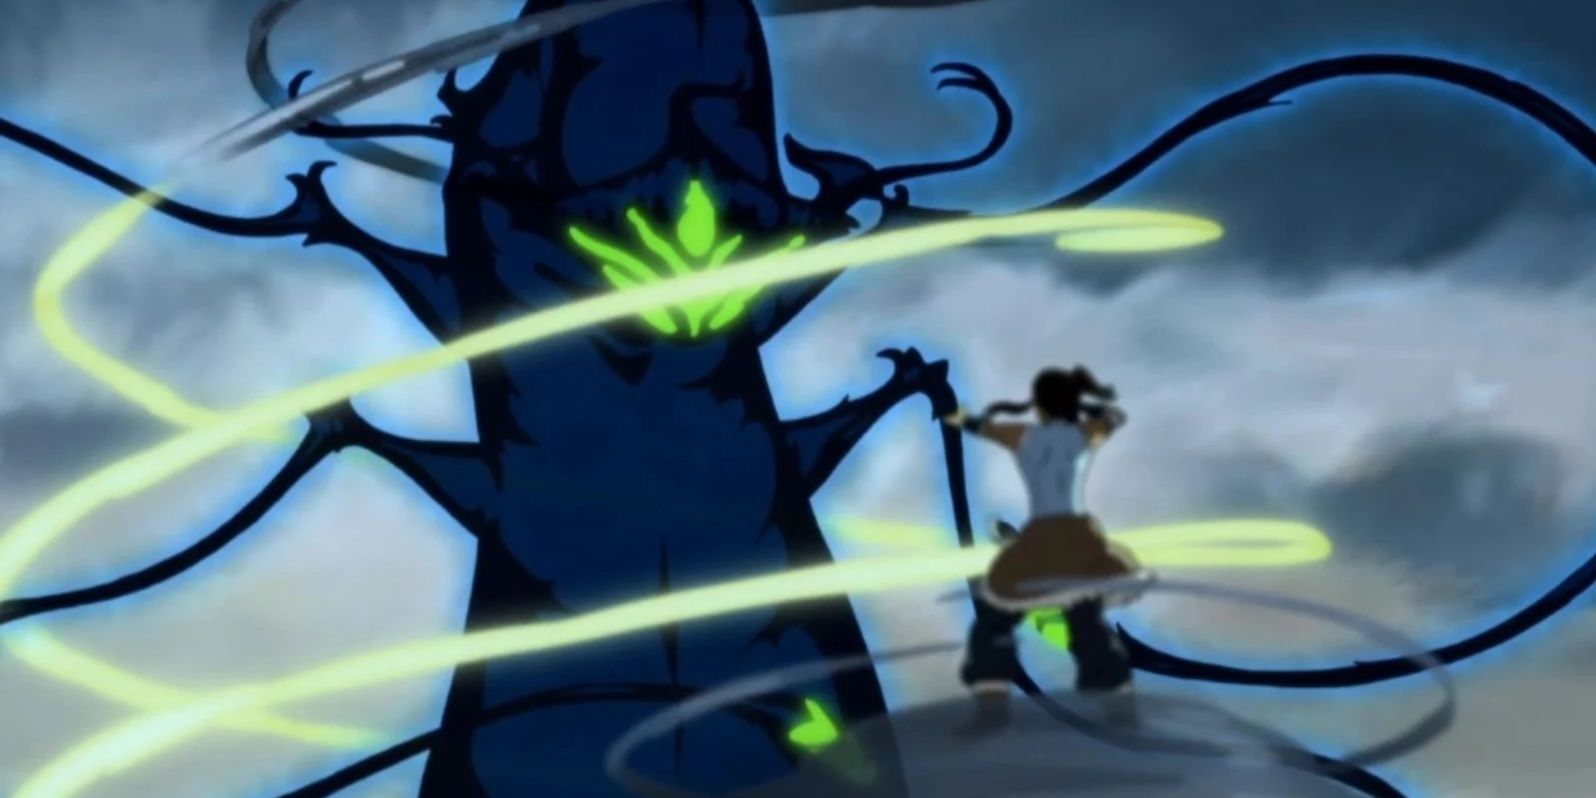 Korra's Most Controversial Storylines, Ranked